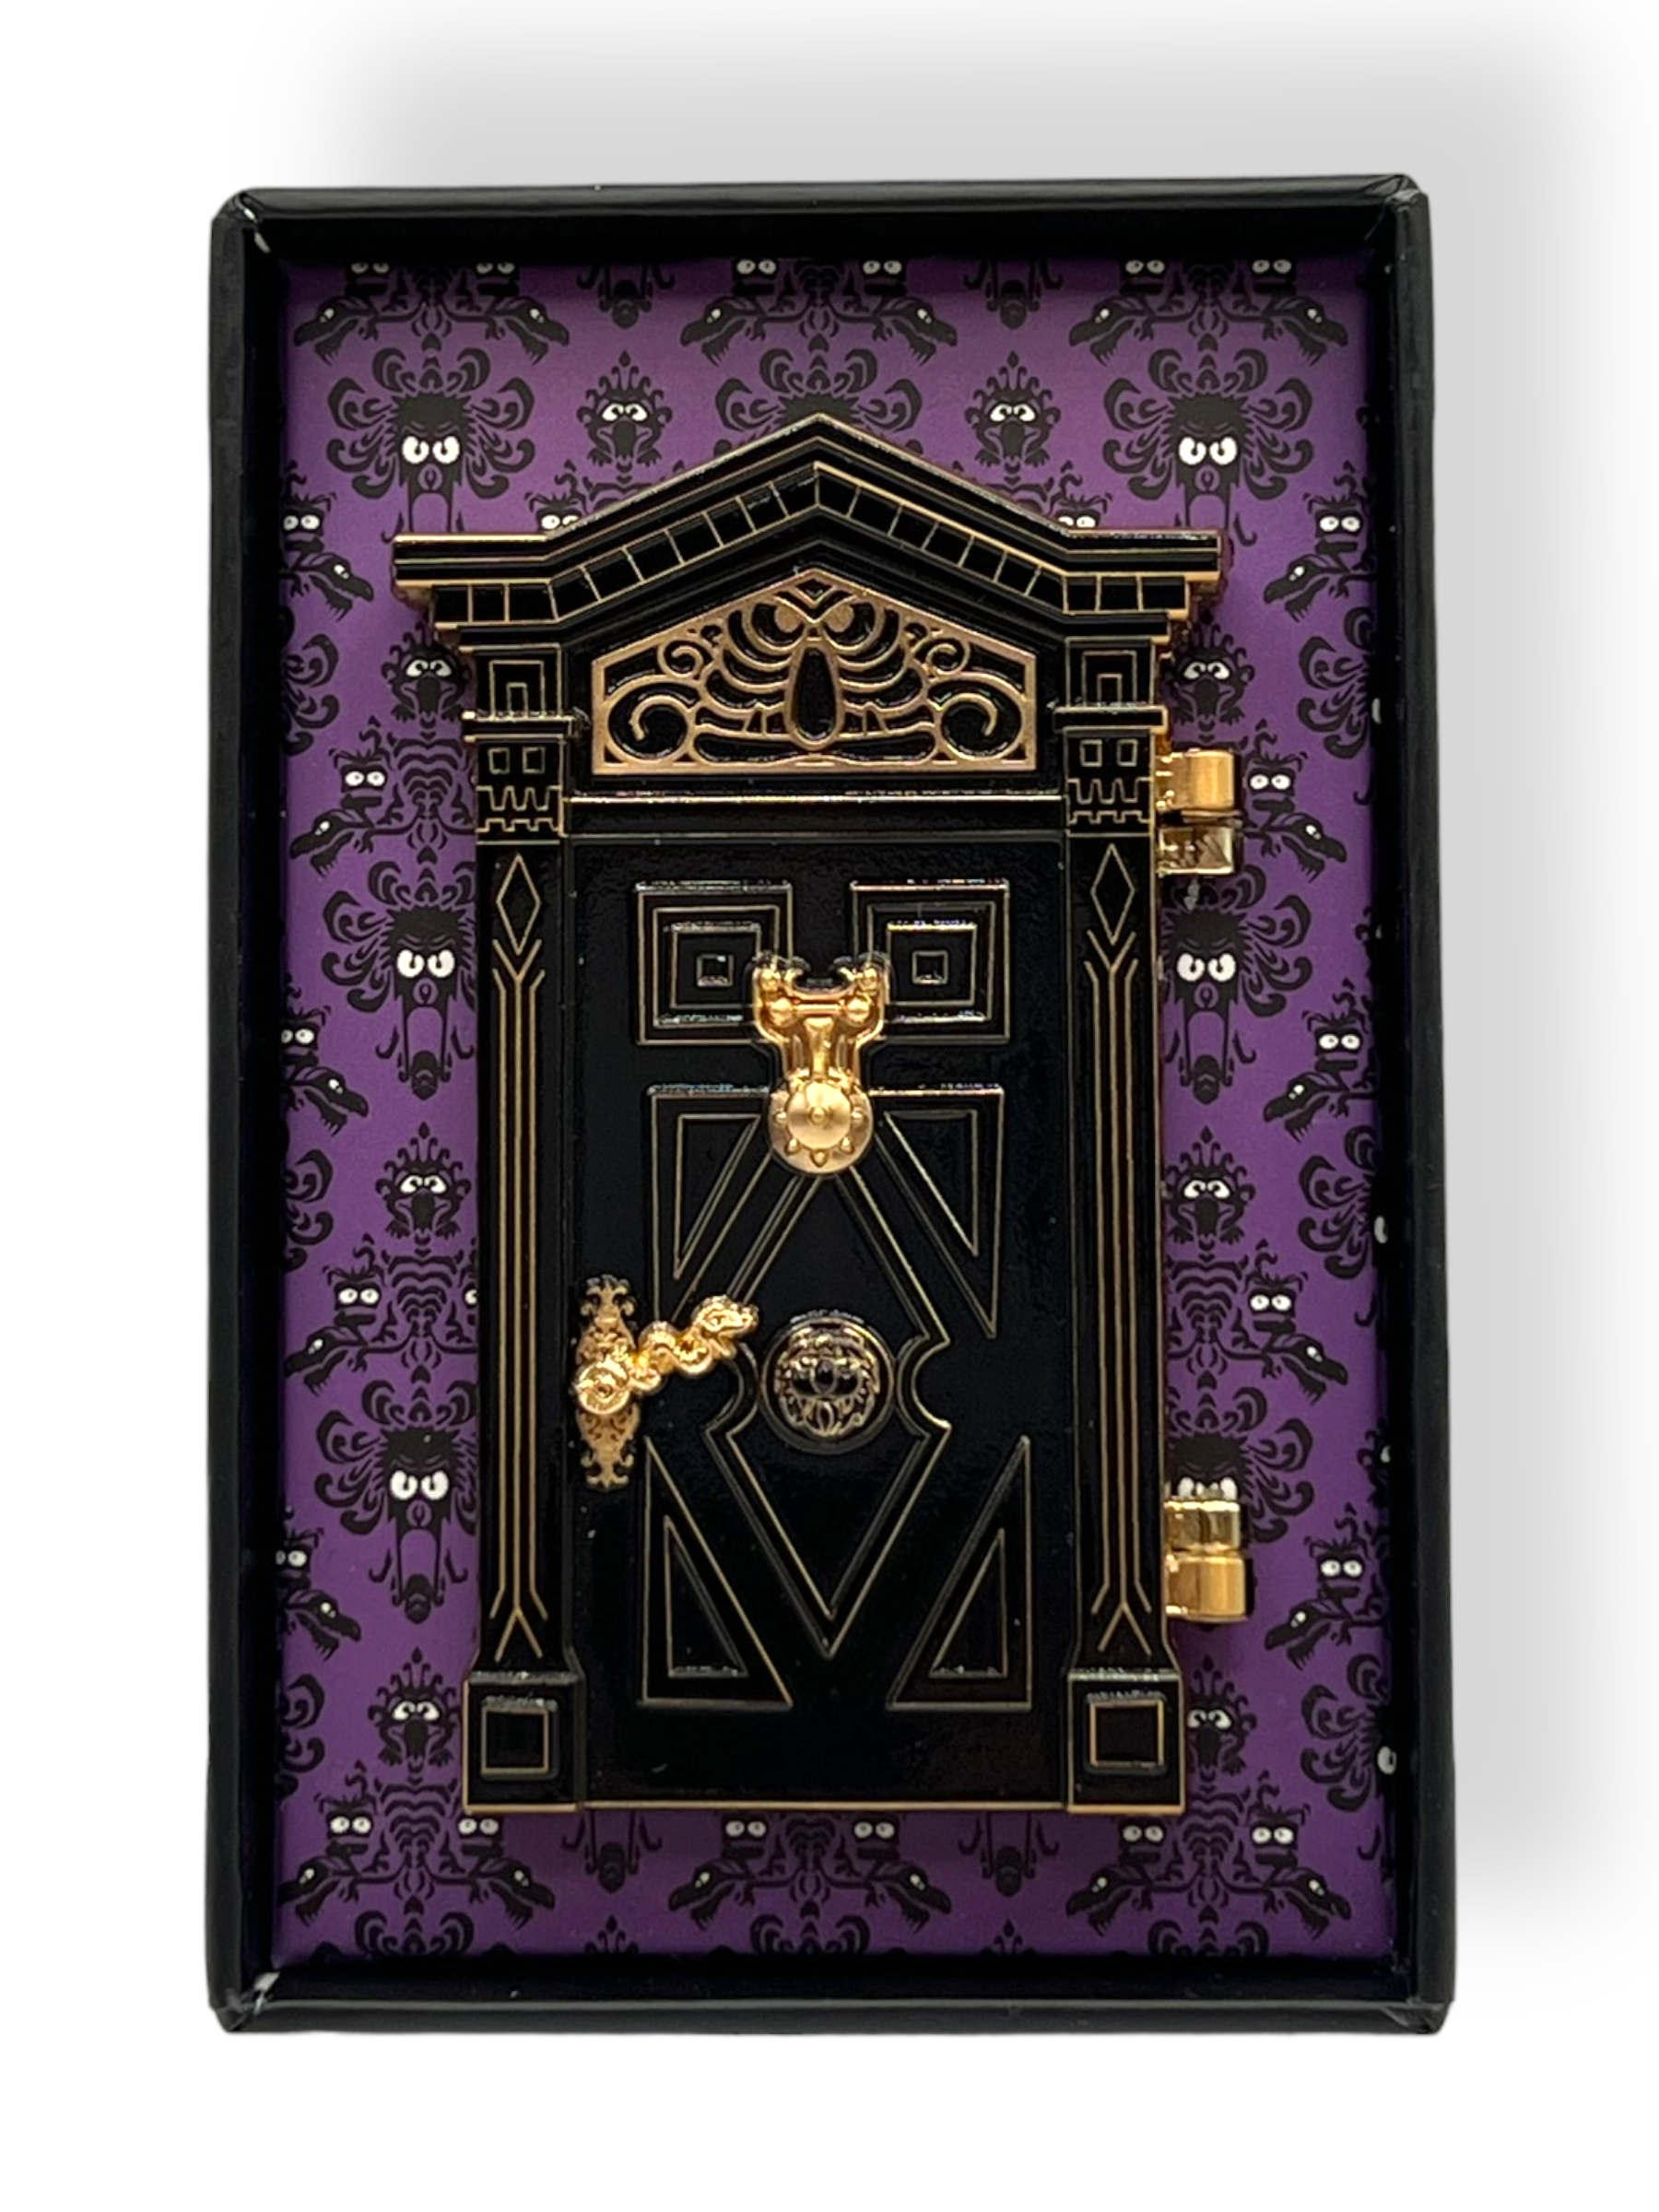 Muppets Haunted Mansion Door Gonzo, Sweetums, and Pepe Pin